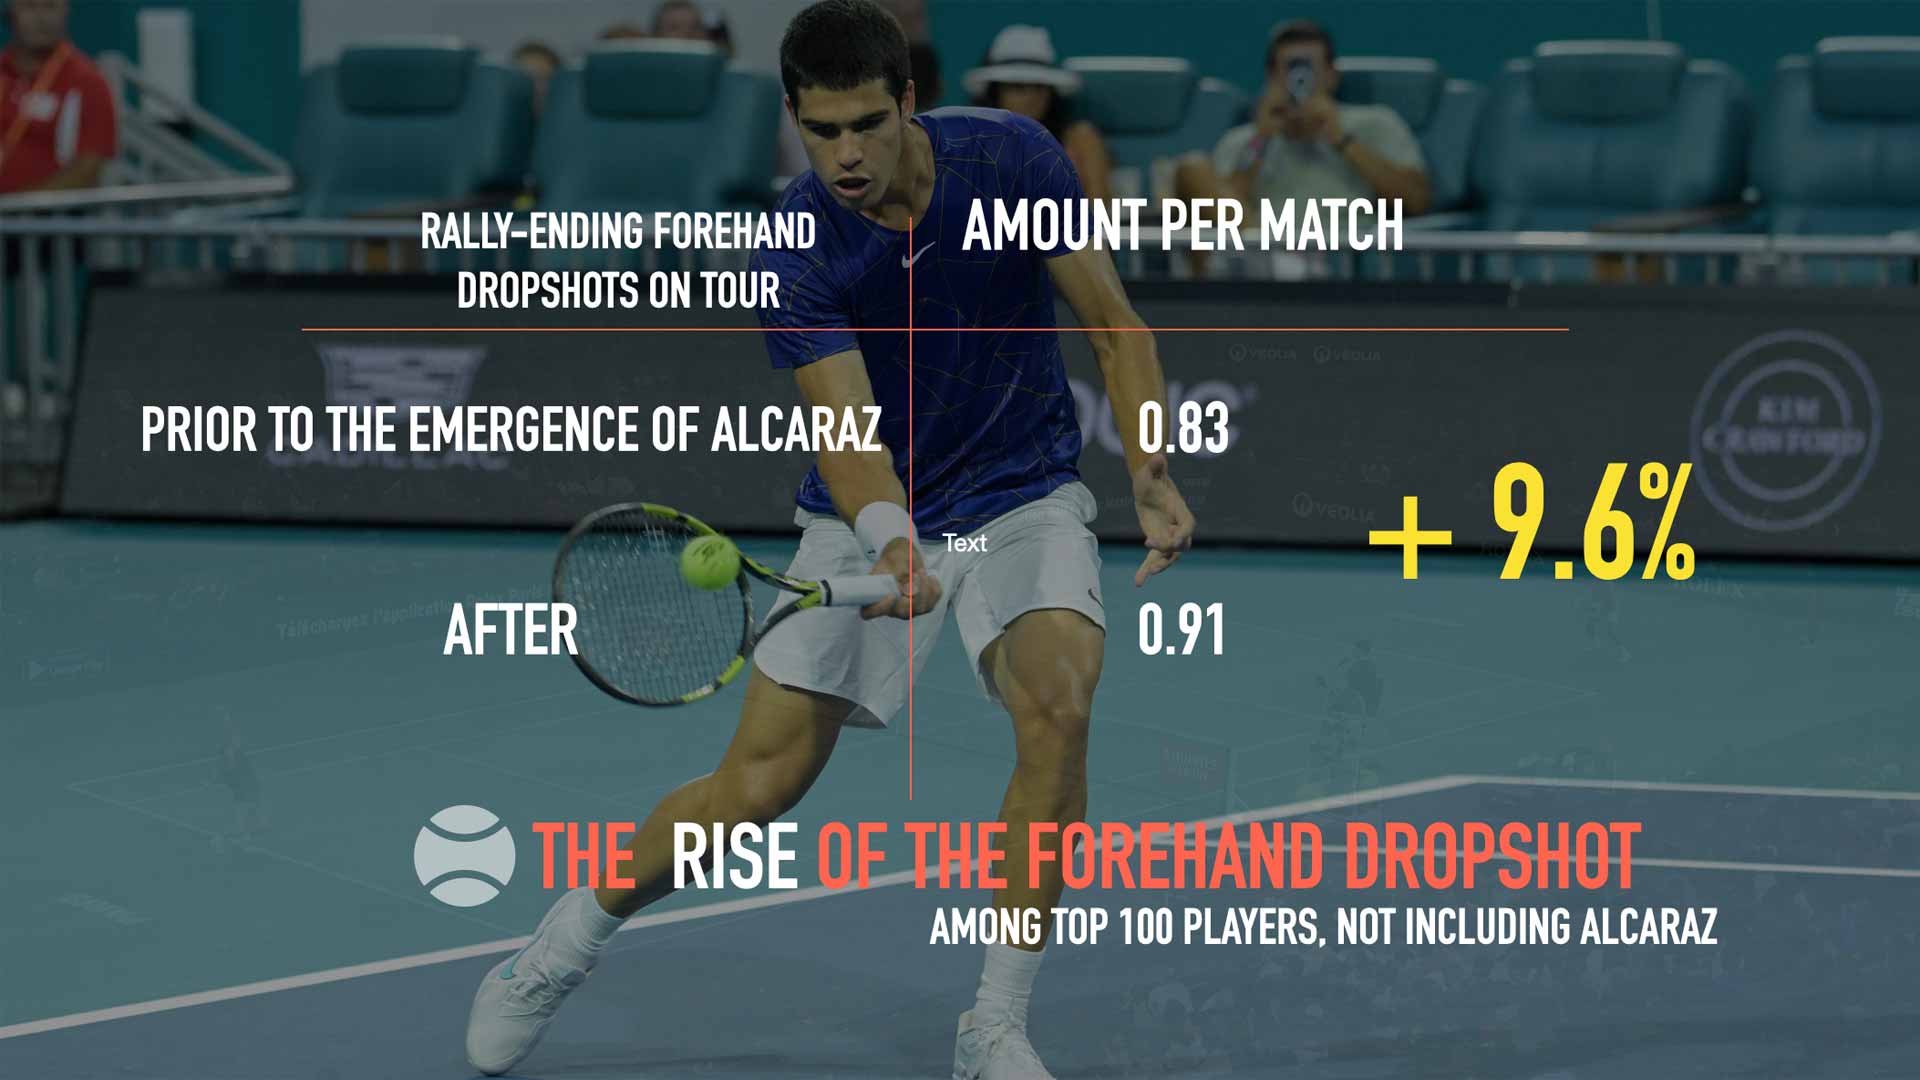 The rise of forehand drop shots before and after the emergence of Alcaraz among the Top 100 Players (excluding Alcaraz). 